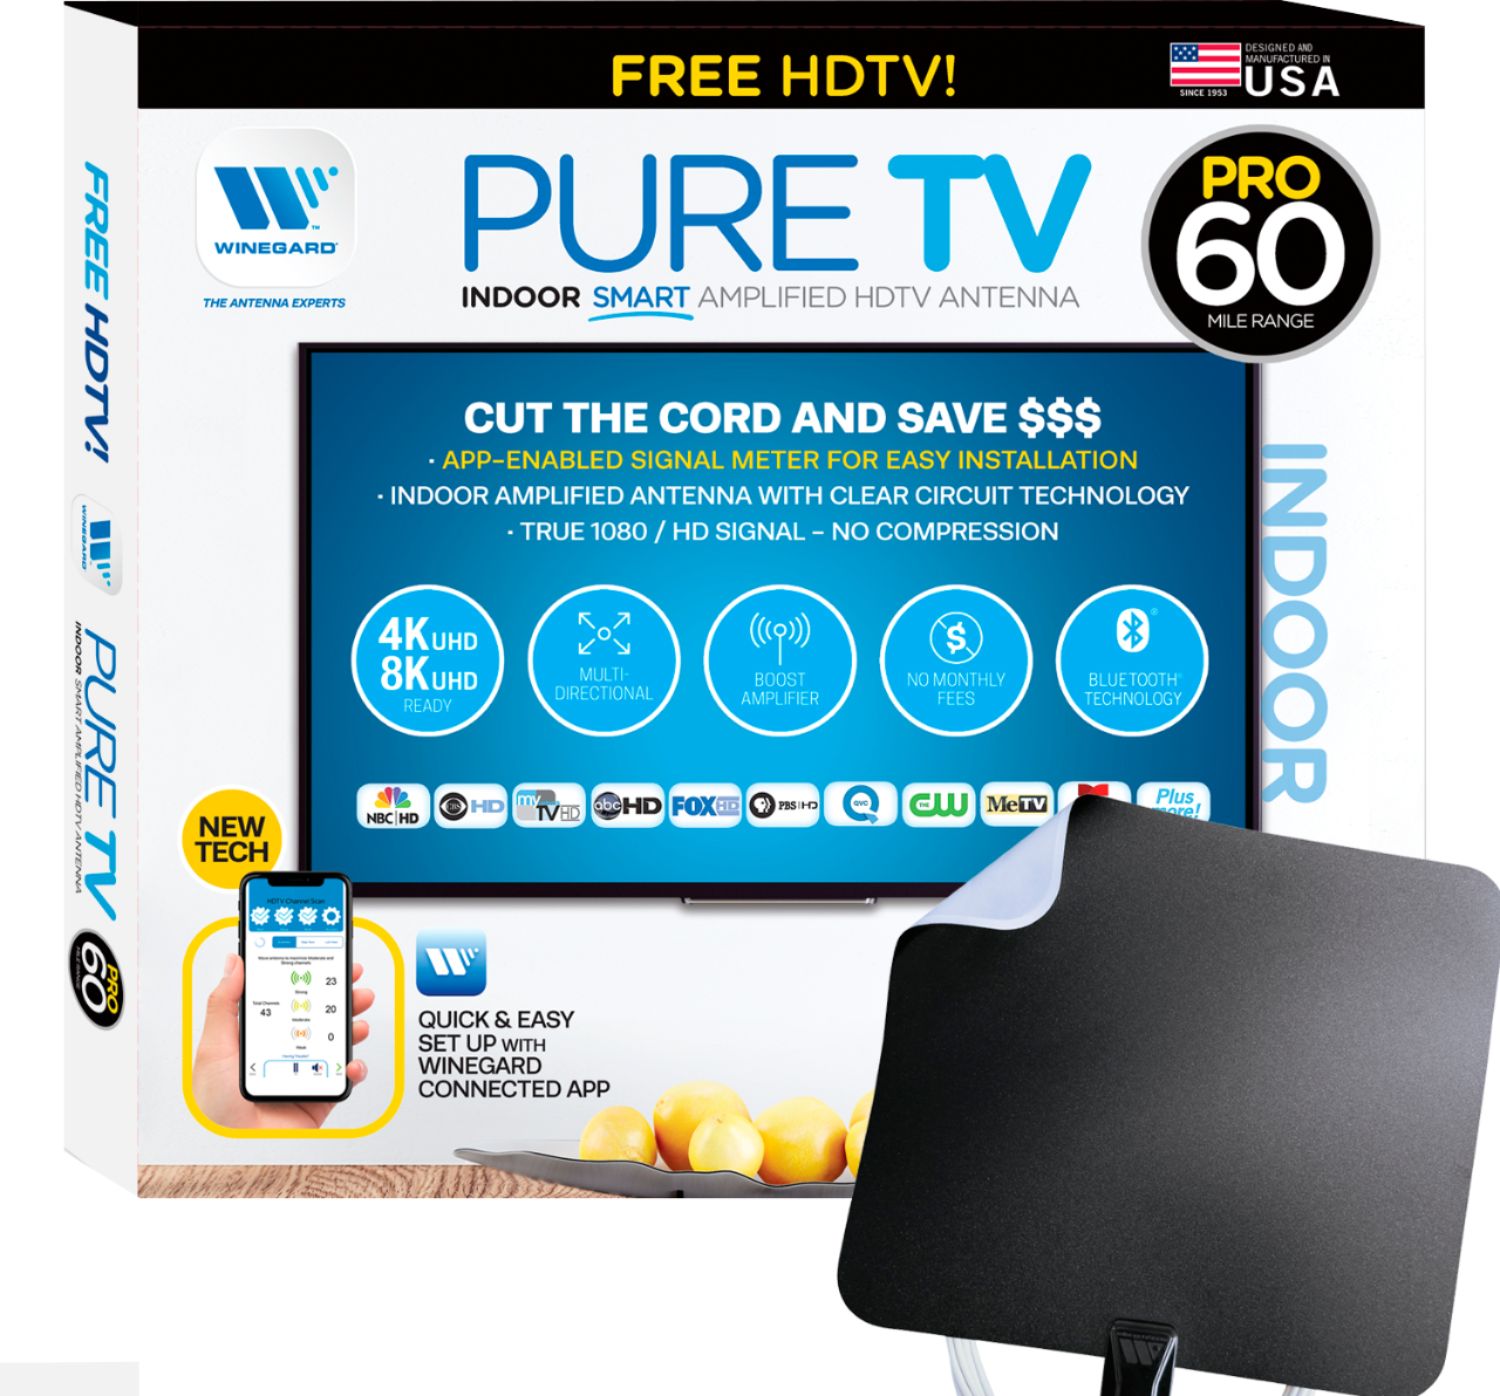 Winegard - PureTV Pro 60 - Indoor Smart Amplified HDTV Antenna + Integrated Channel Finder - Black and White